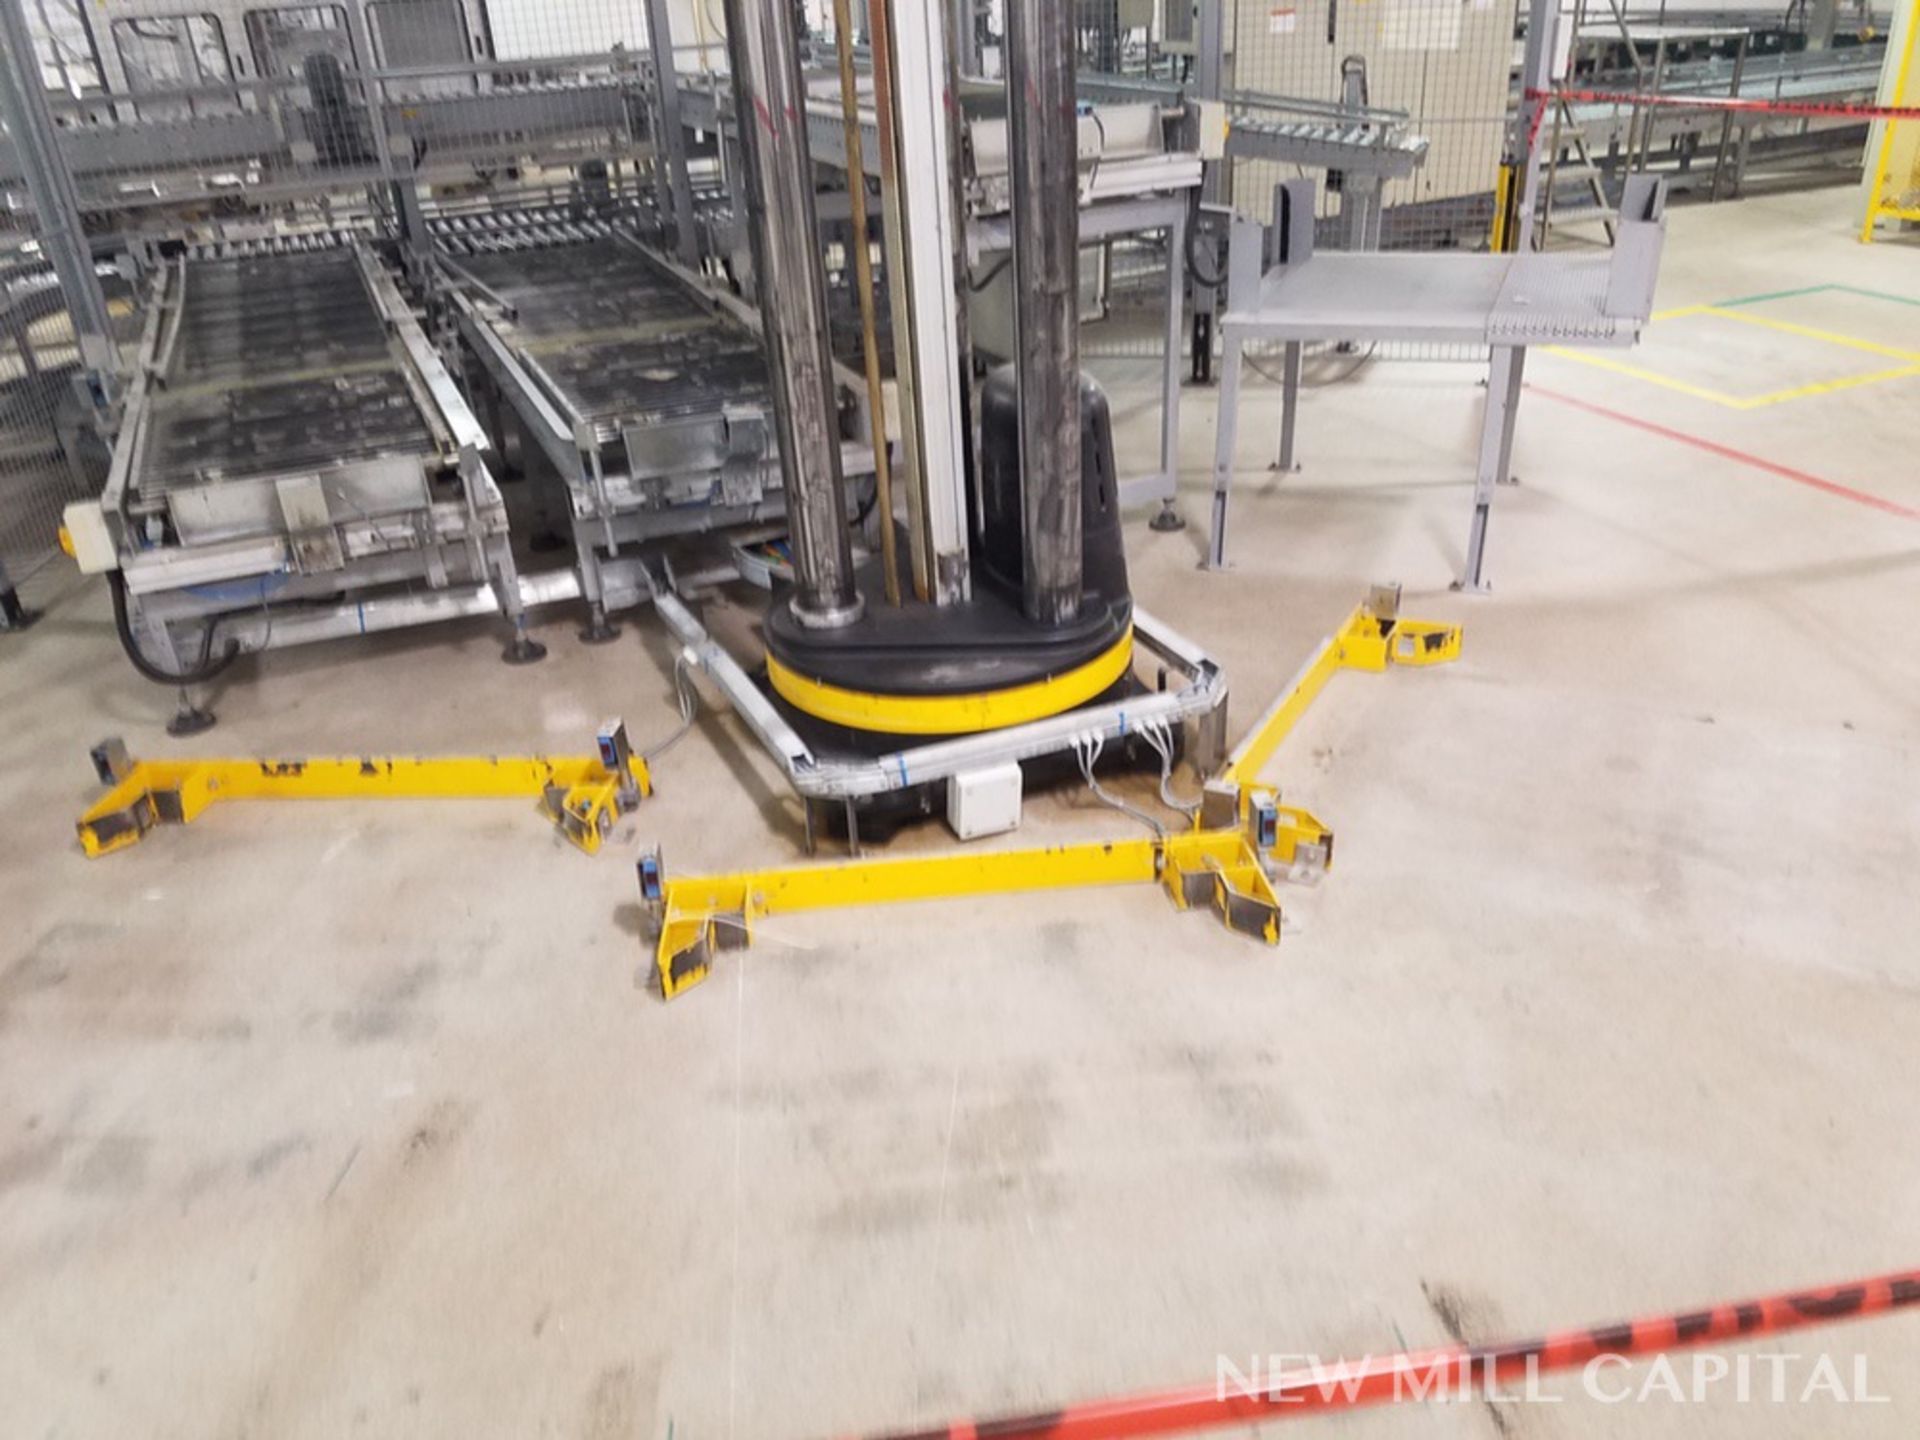 Skilled 504 Palletizing Robot | Contact Rigger for Pricing - Image 13 of 13